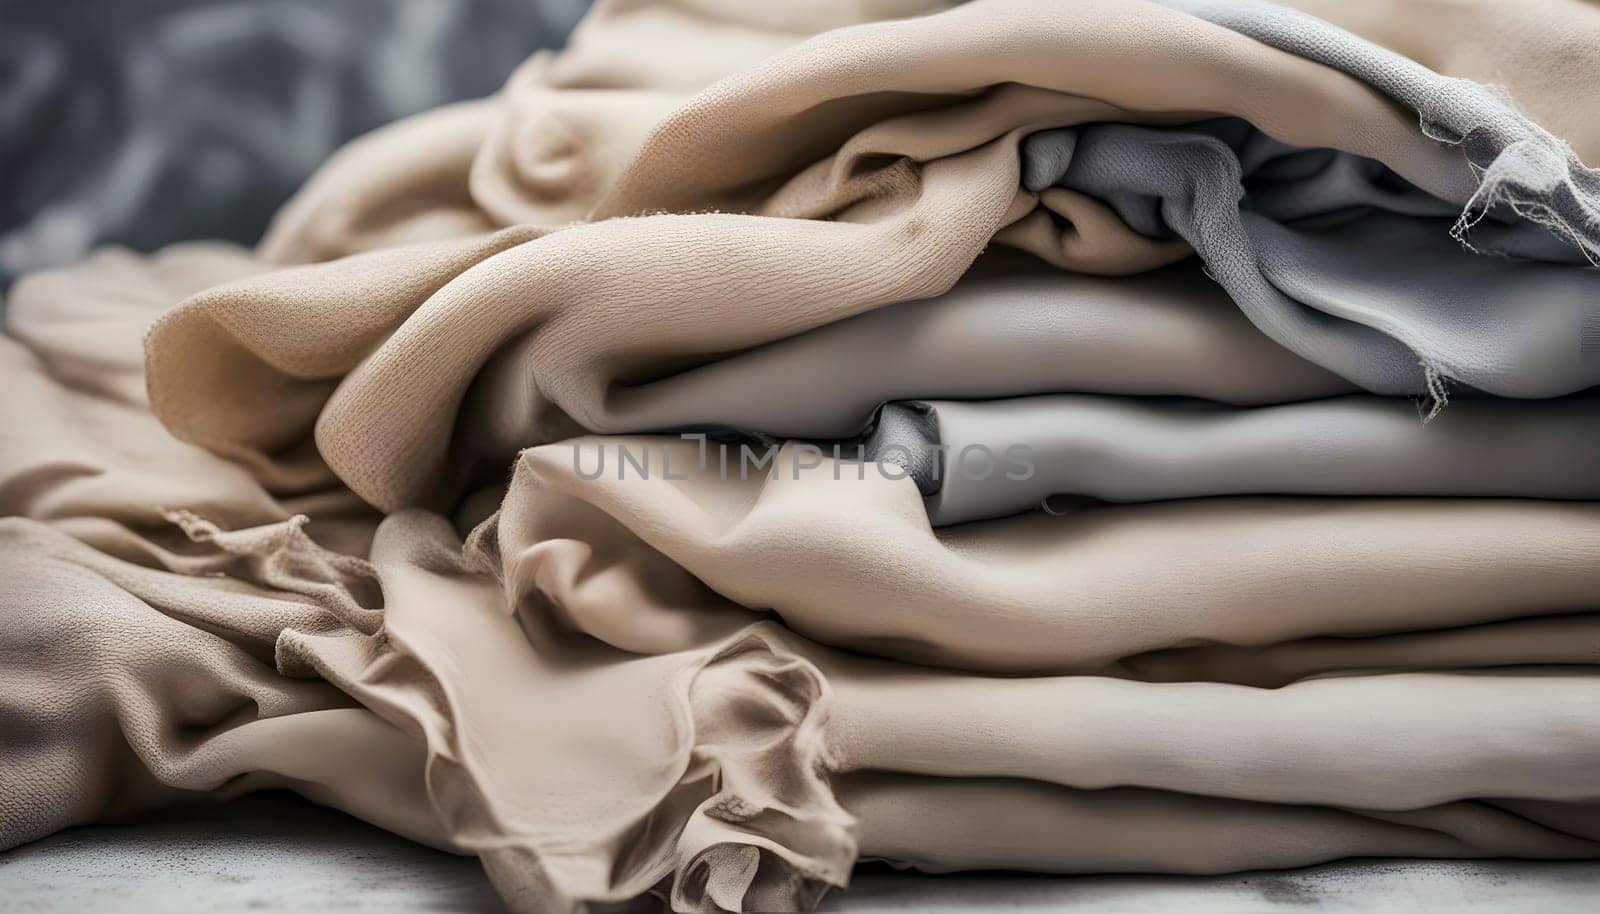 Assorted Textile Fabrics Piled Together by rostik924